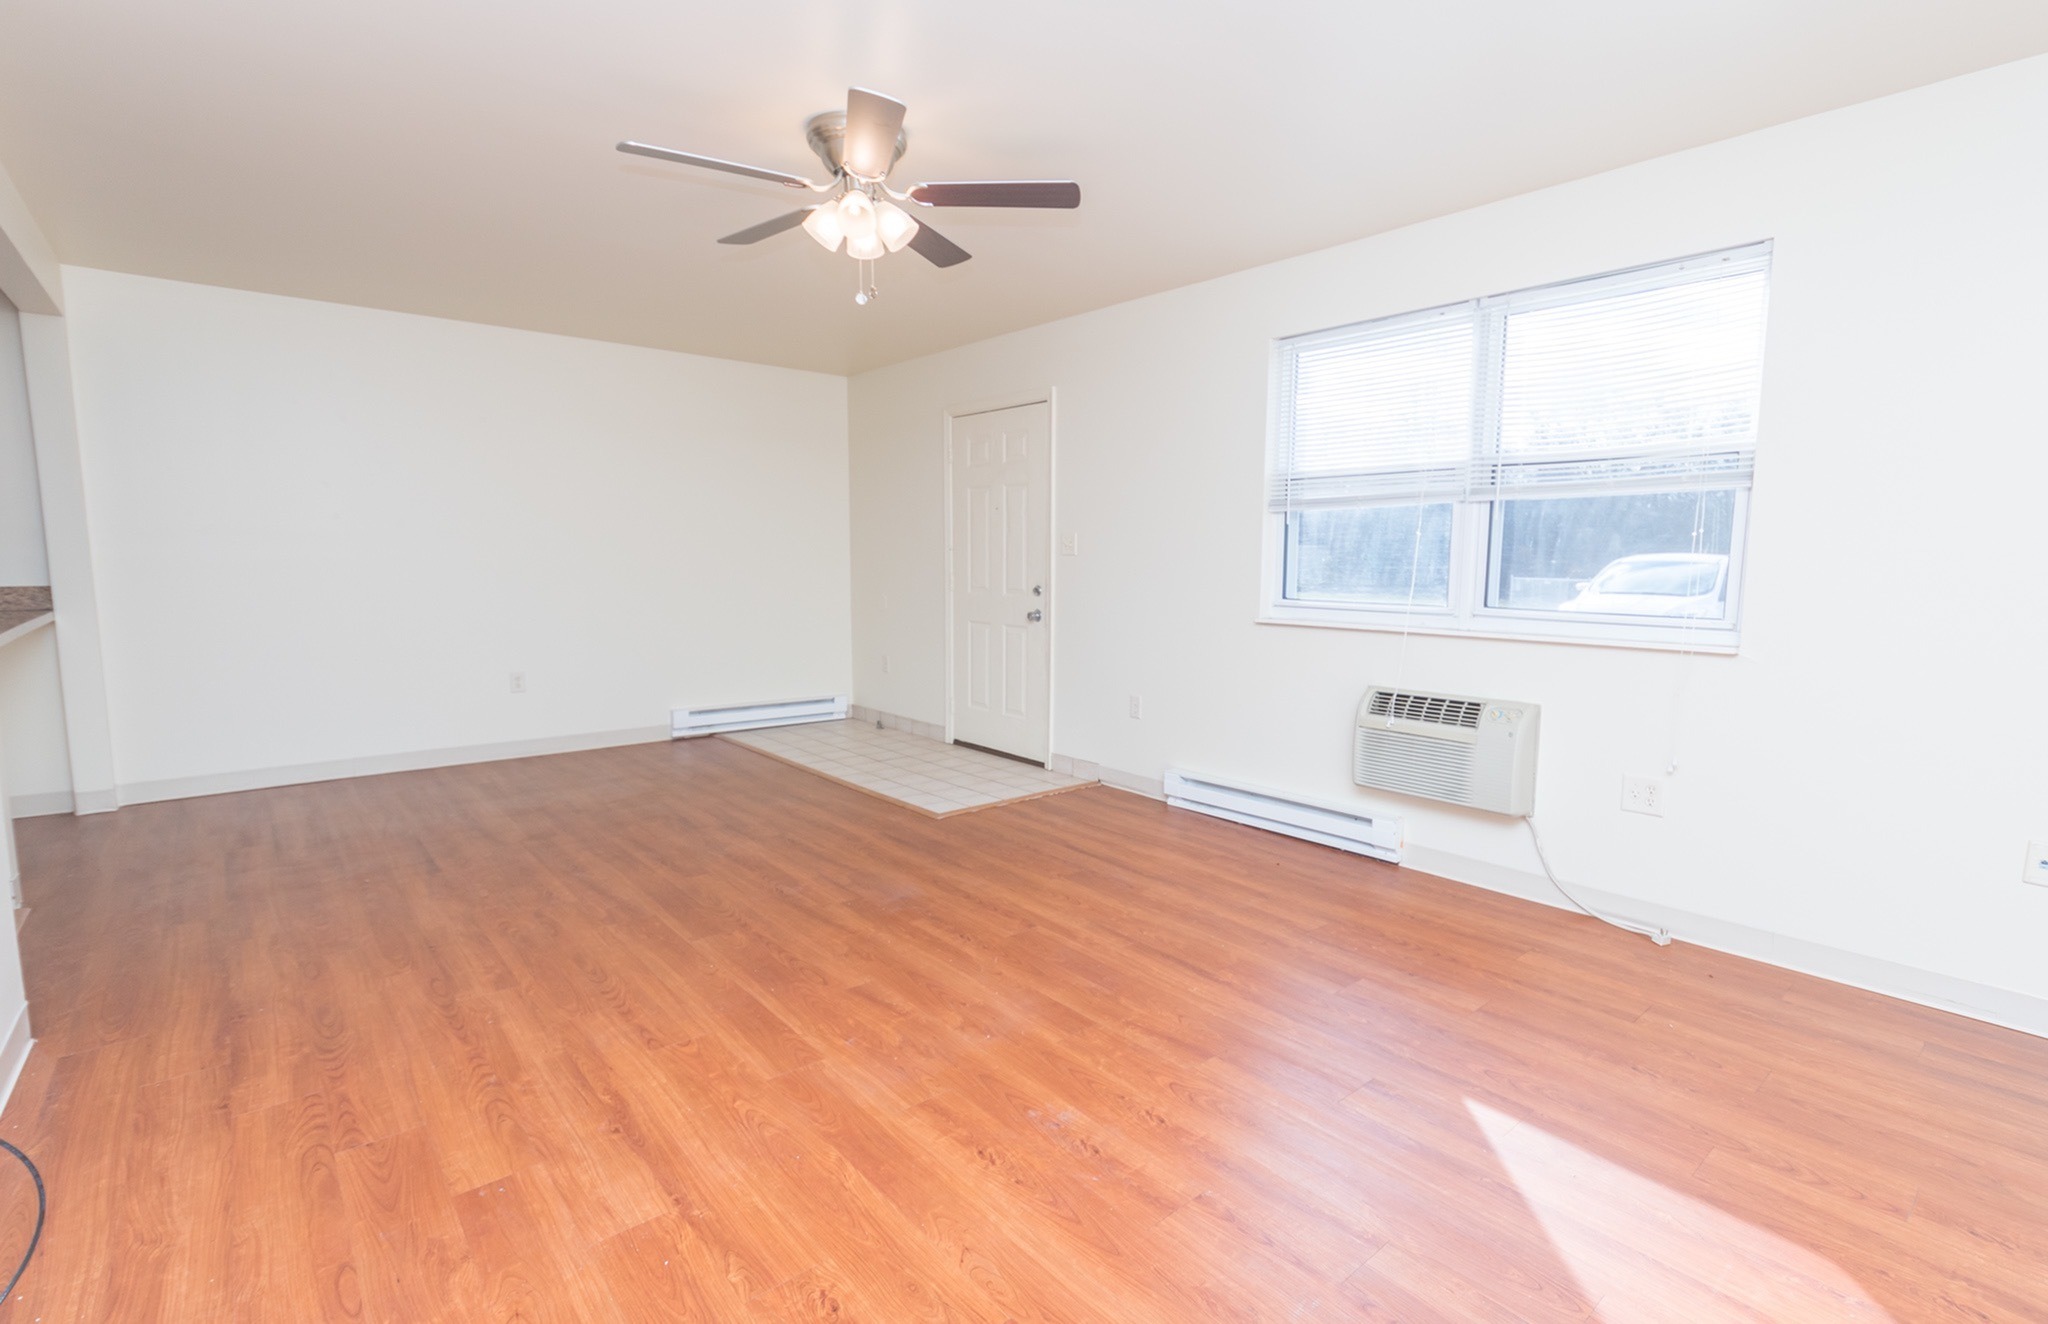 Spacious living and dining area with a ceiling fan and 2 windows.